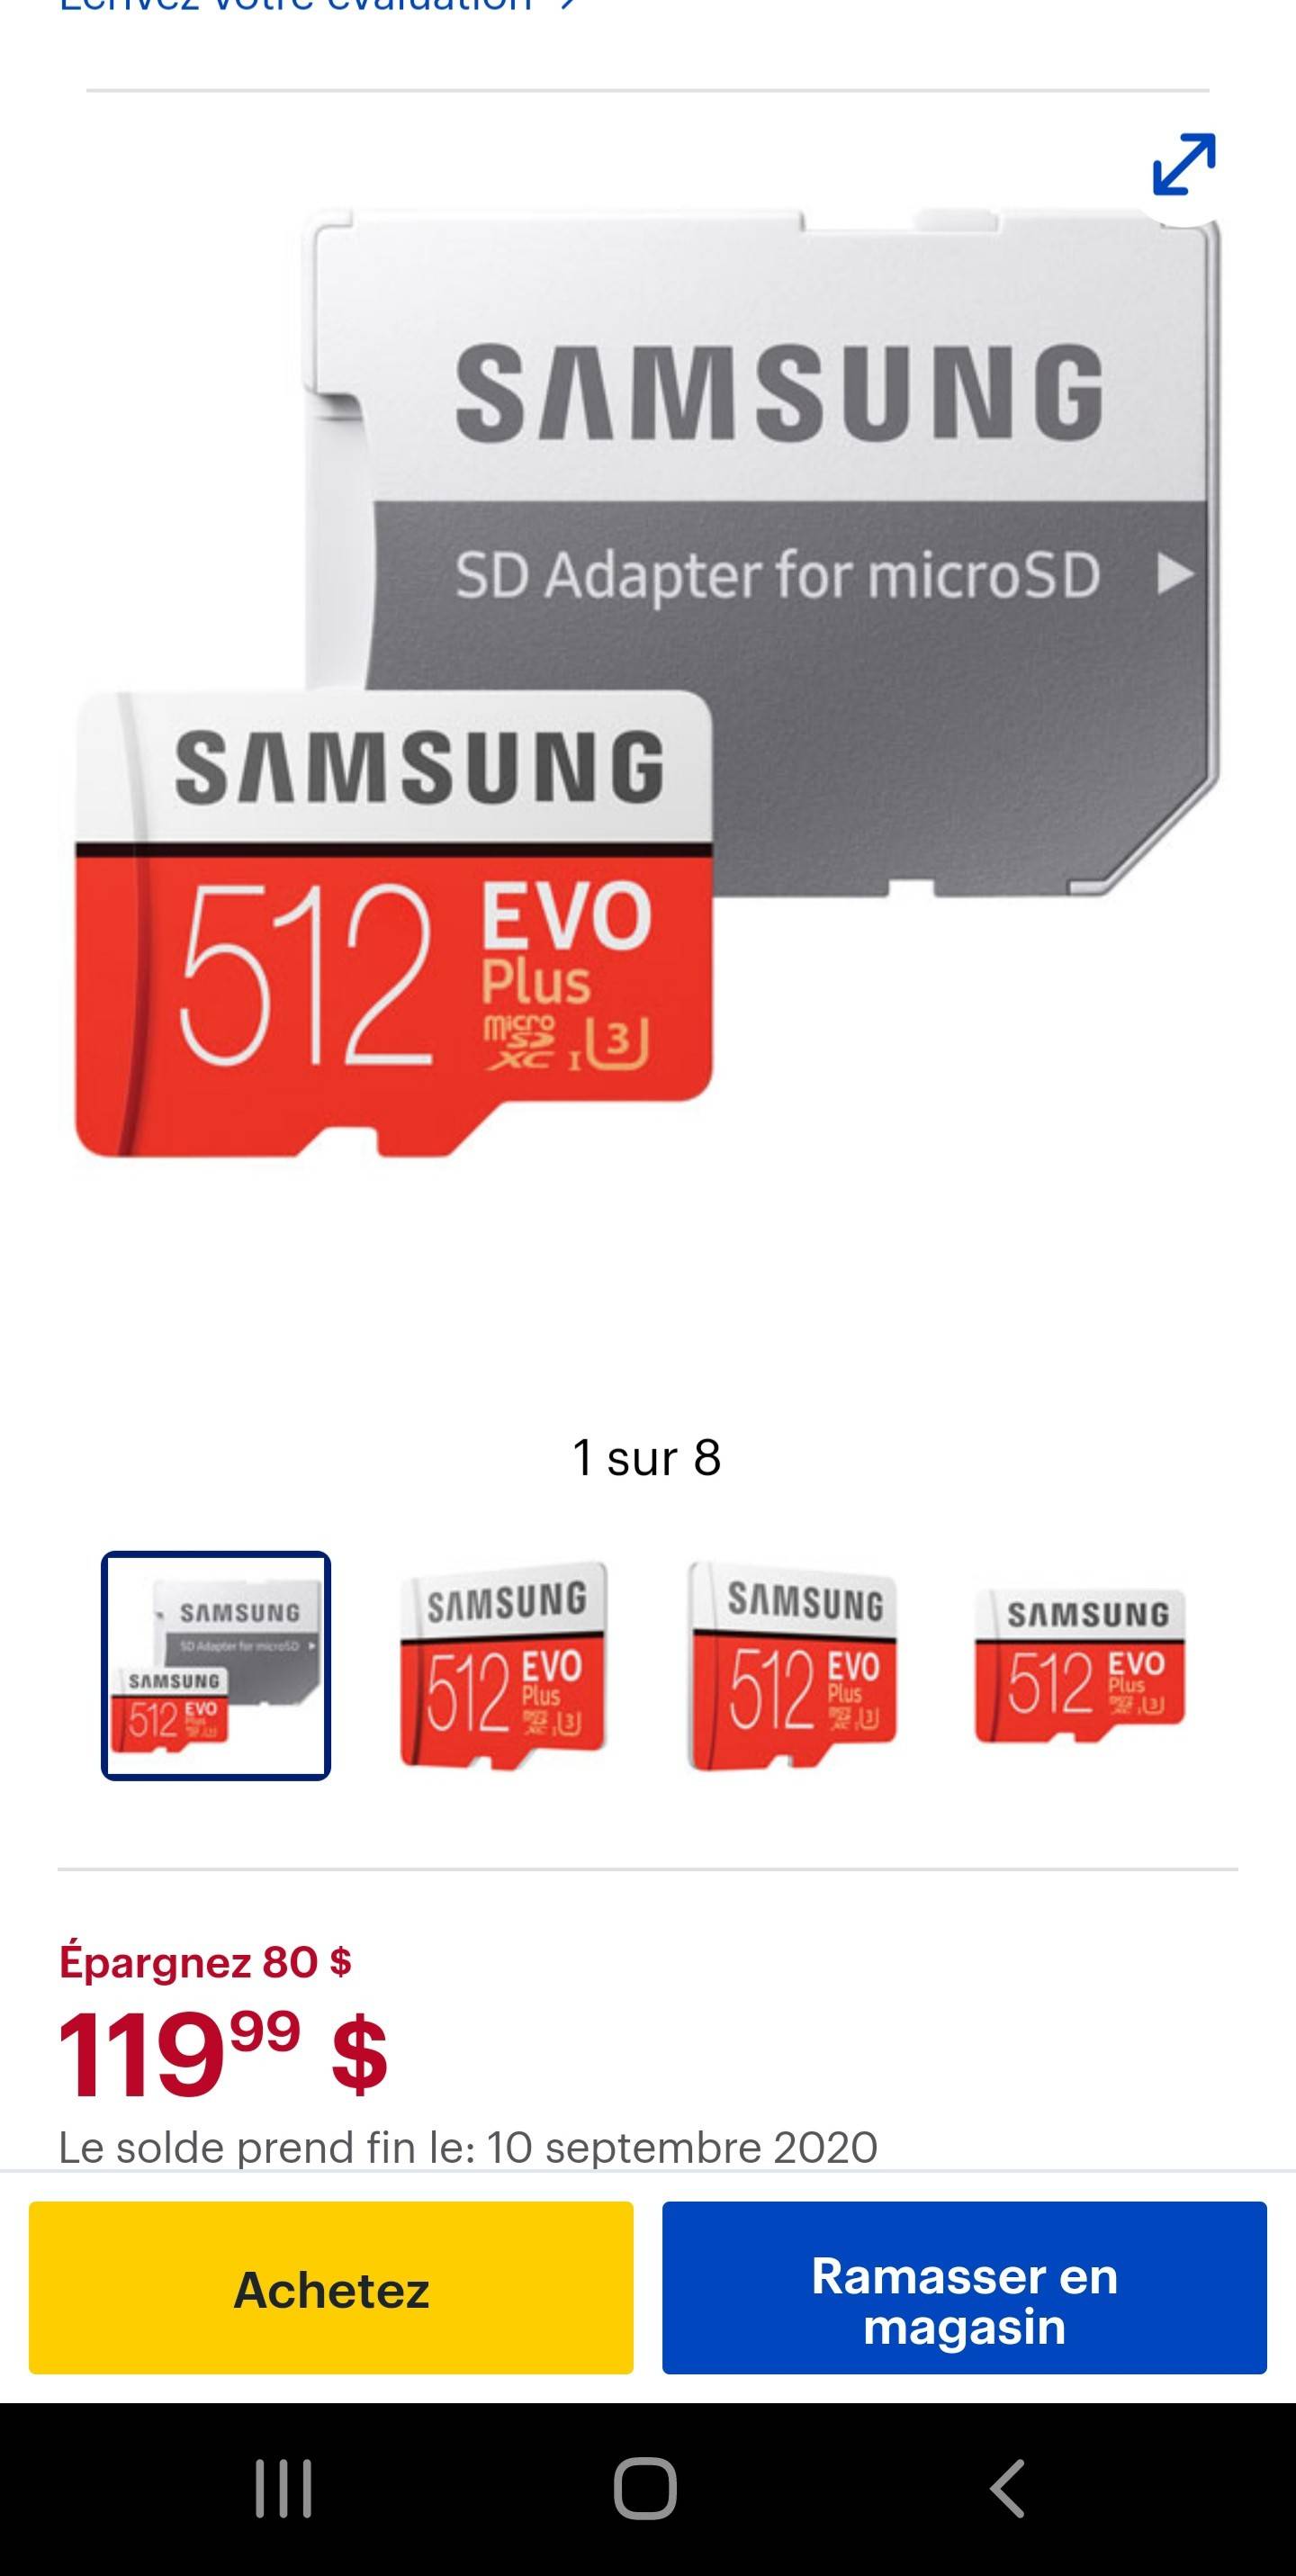 samsung s9... max size of micro sd card is 400 go? - Samsung Members